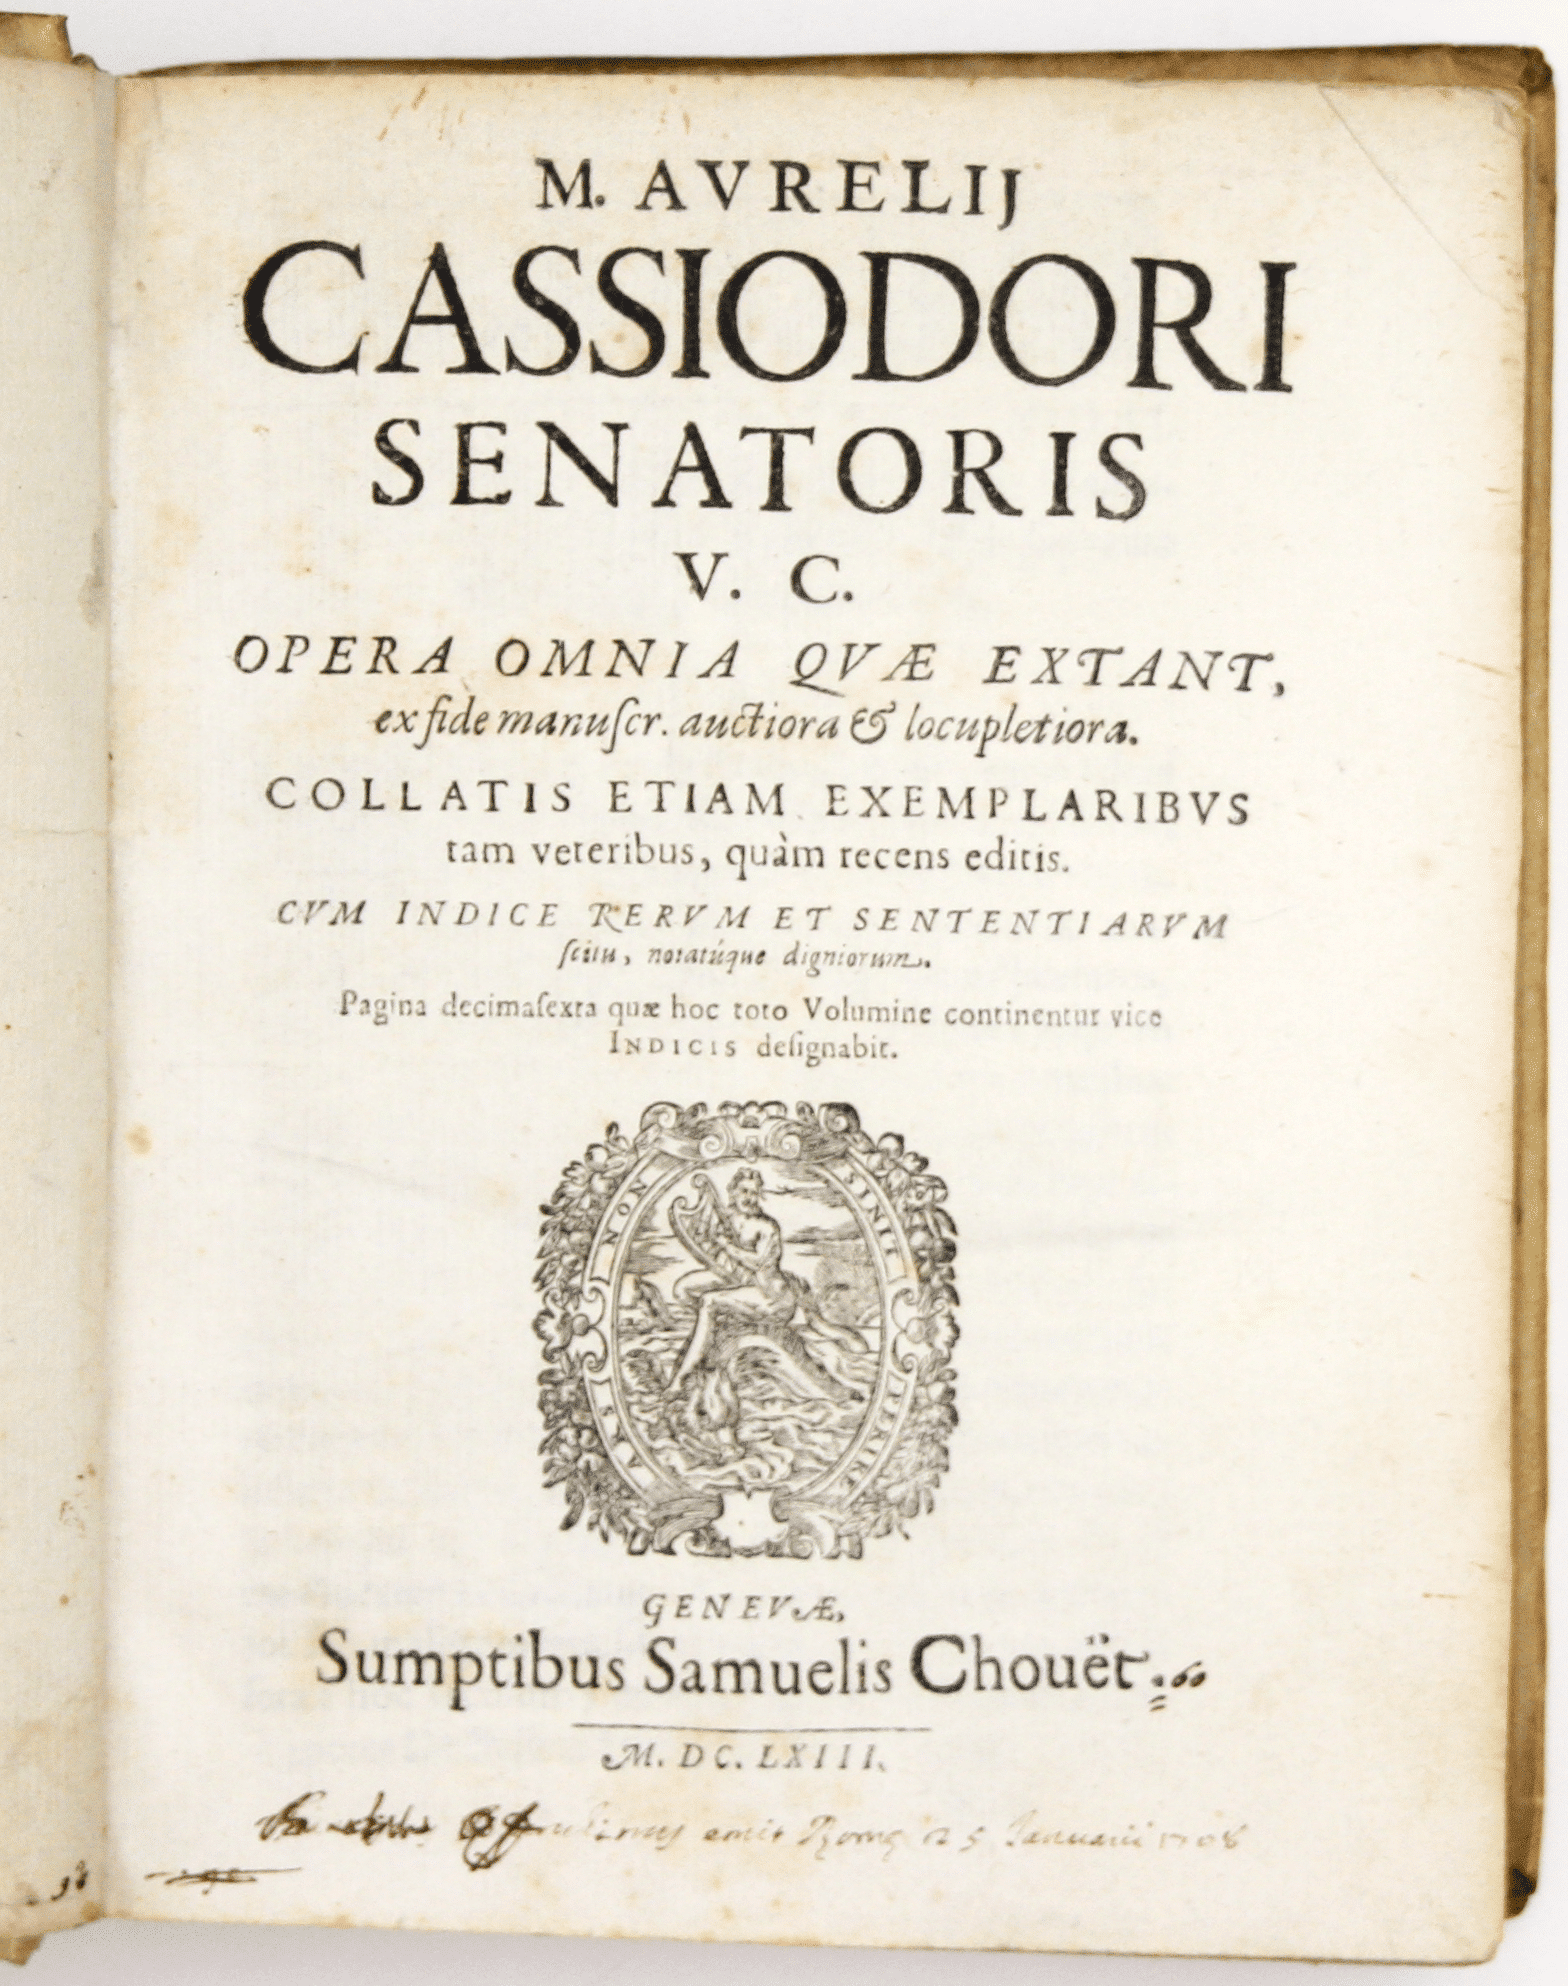 The Works of Cassiodorus